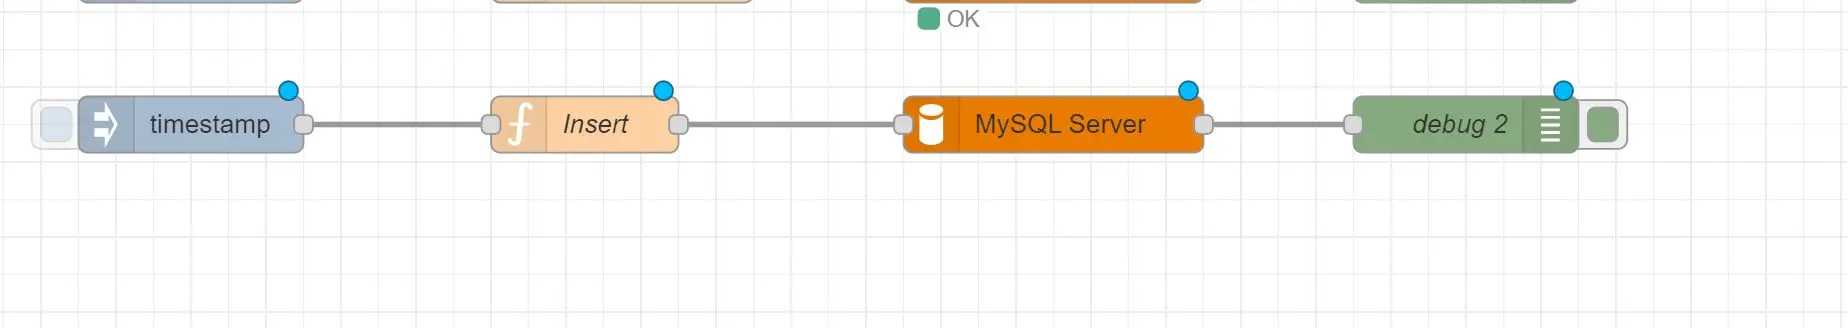 How to Insert and Save data to MySQL using Node-Red and SQL Query